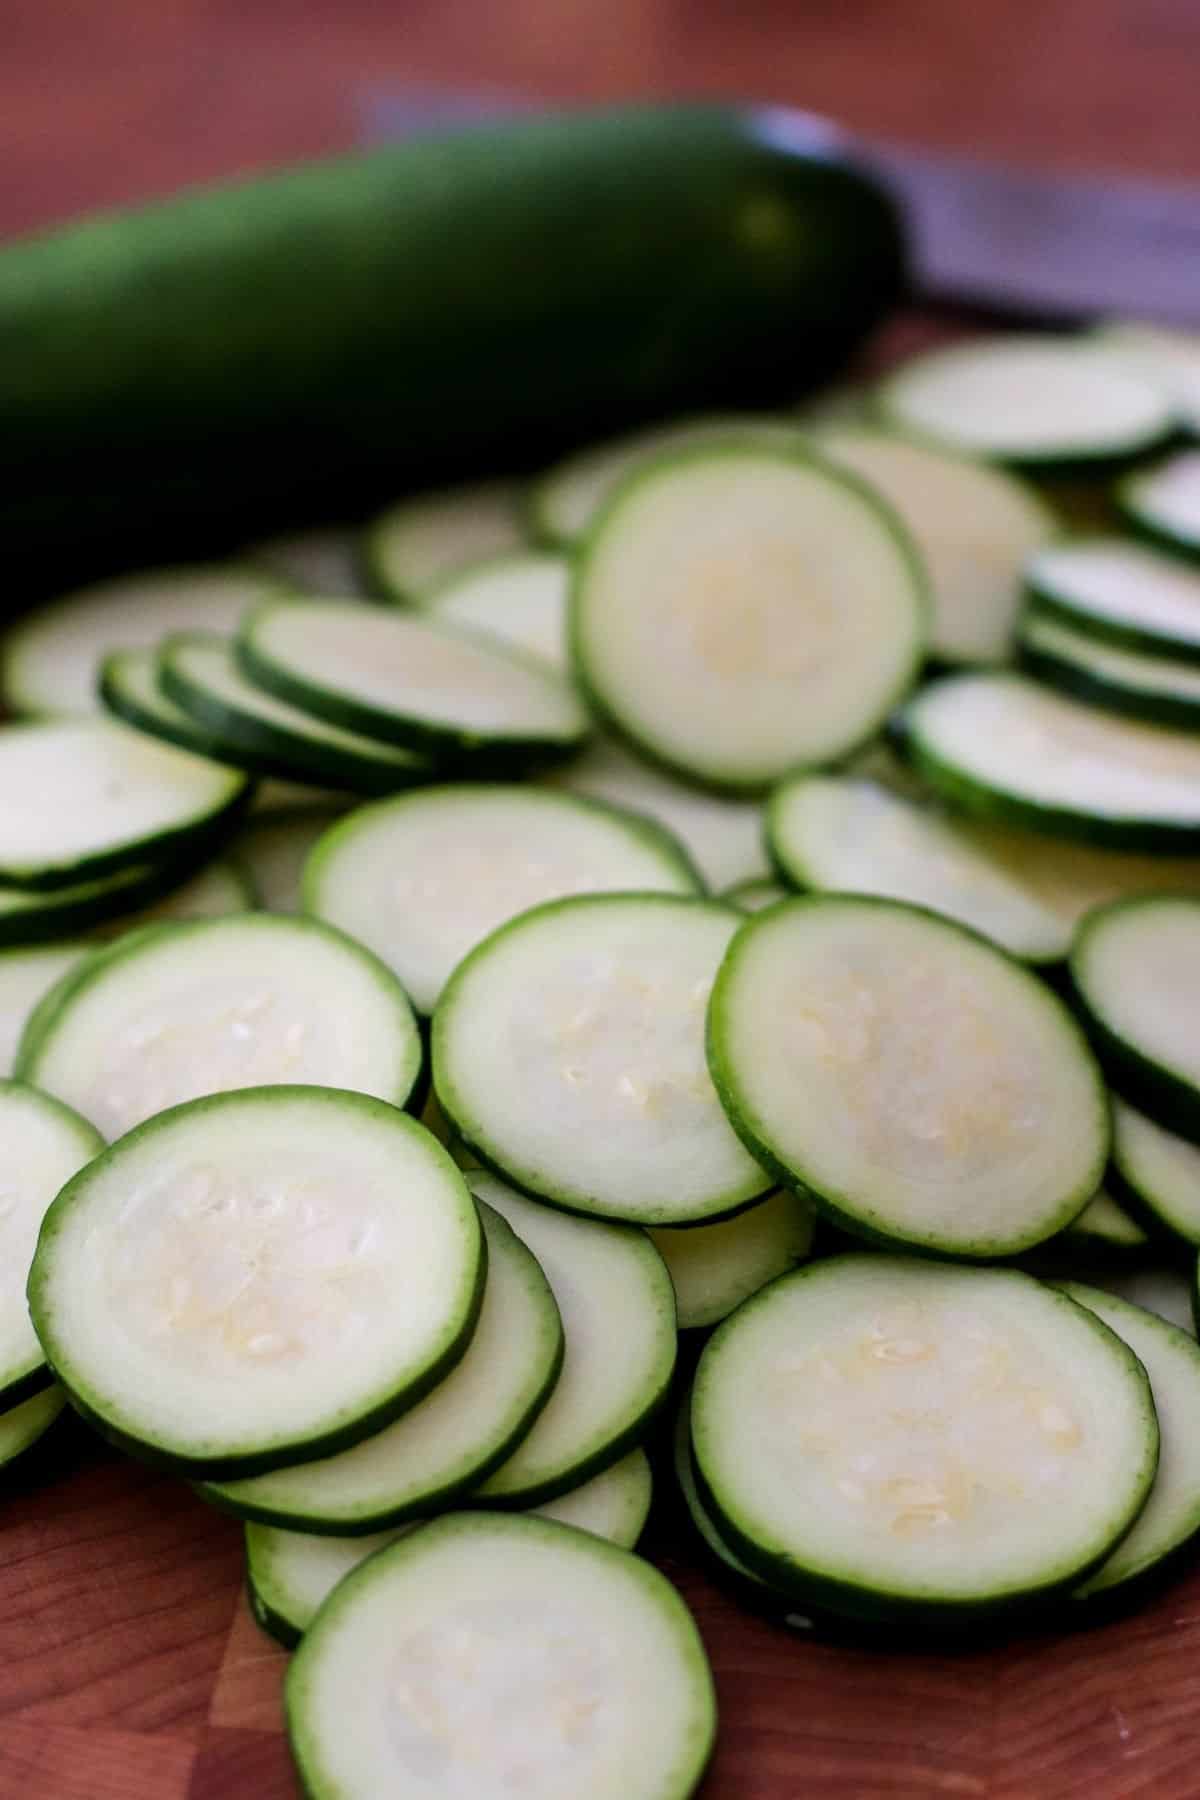 Zucchini sliced in rounds on a cutting board